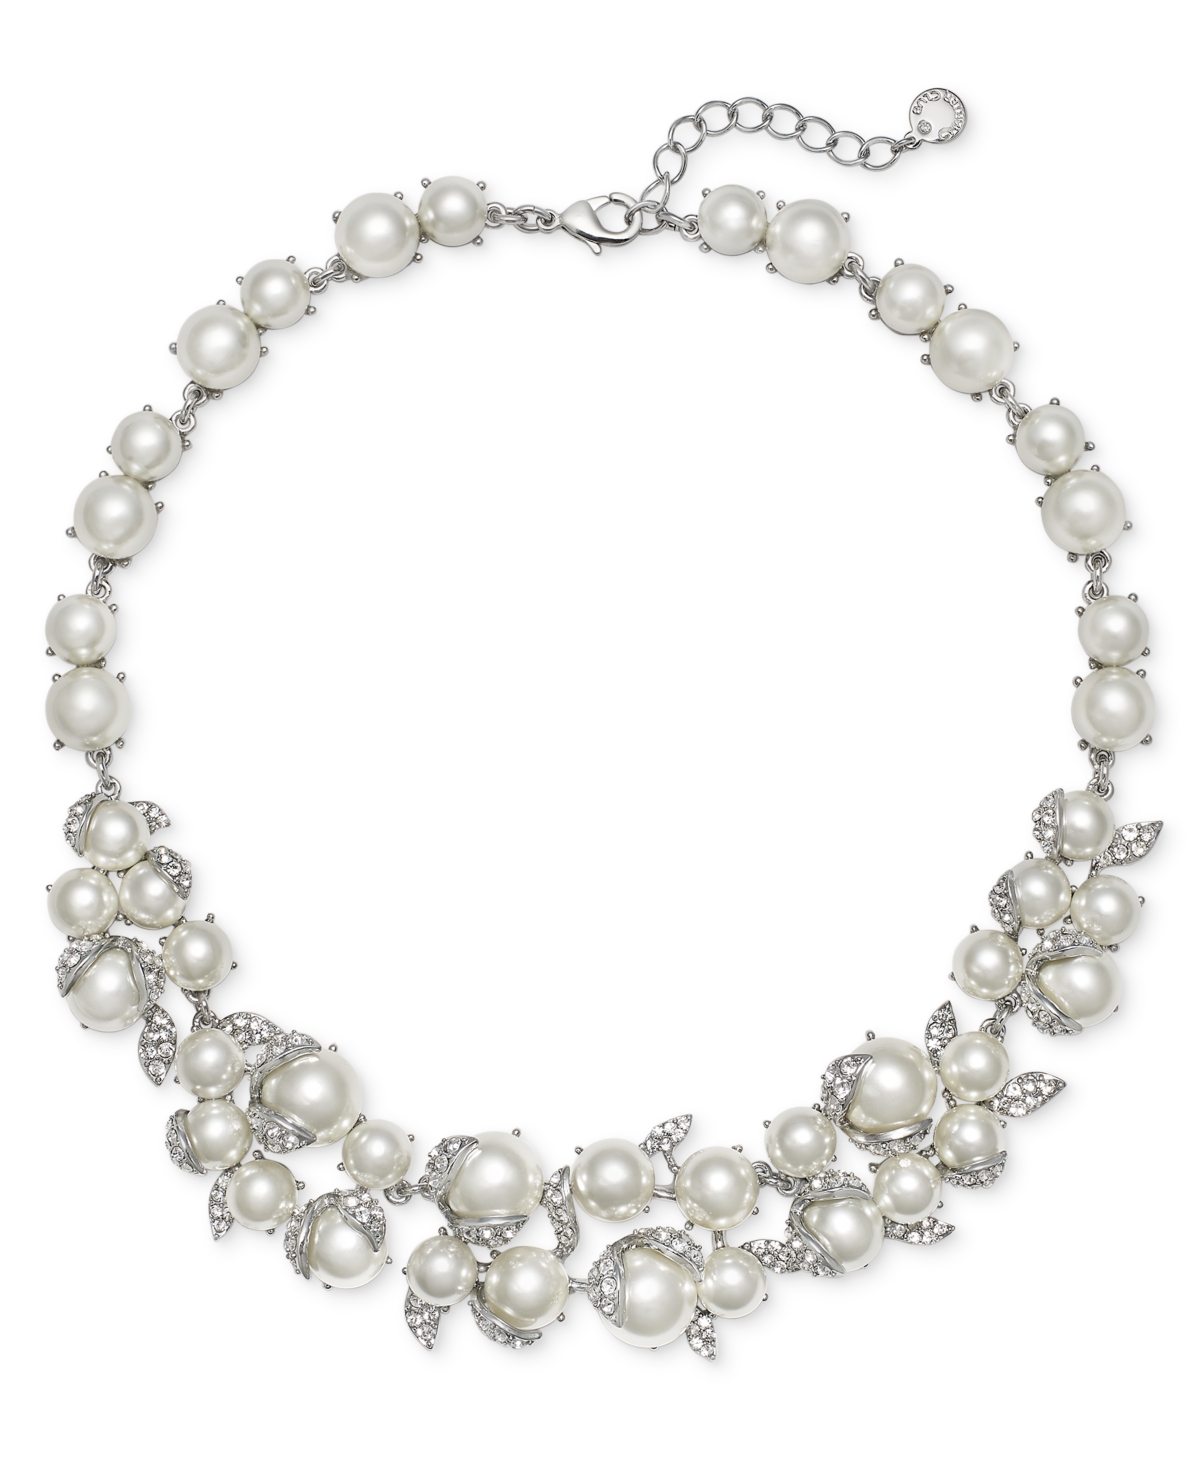 Silver-Tone Crystal & Imitation Pearl Statement Necklace, 17" + 2" extender, Created for Macy's - Silver